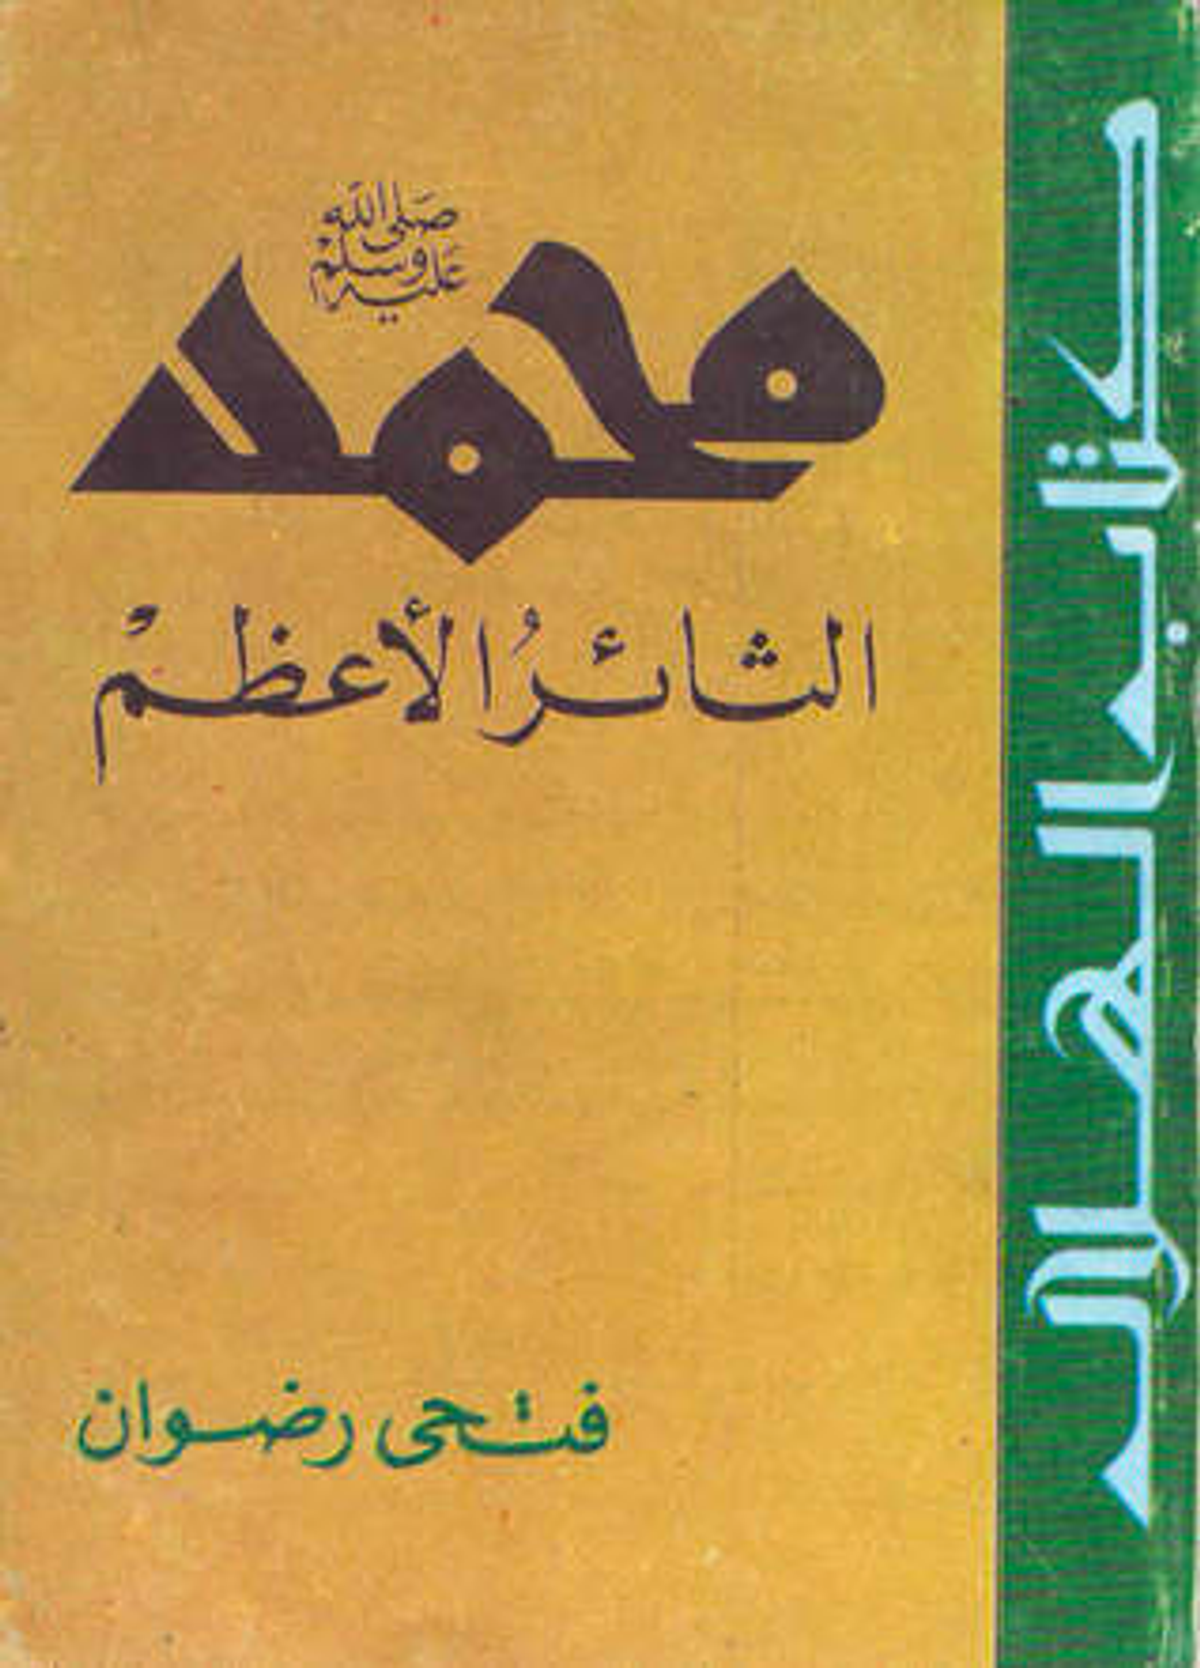 'Muhammad, the Great Revolutionary,' written by Fathi Radwan, a former member of an Egyptian fascist organization is an example of a flood of literary production offering a revolutionary treatment of Muhammad